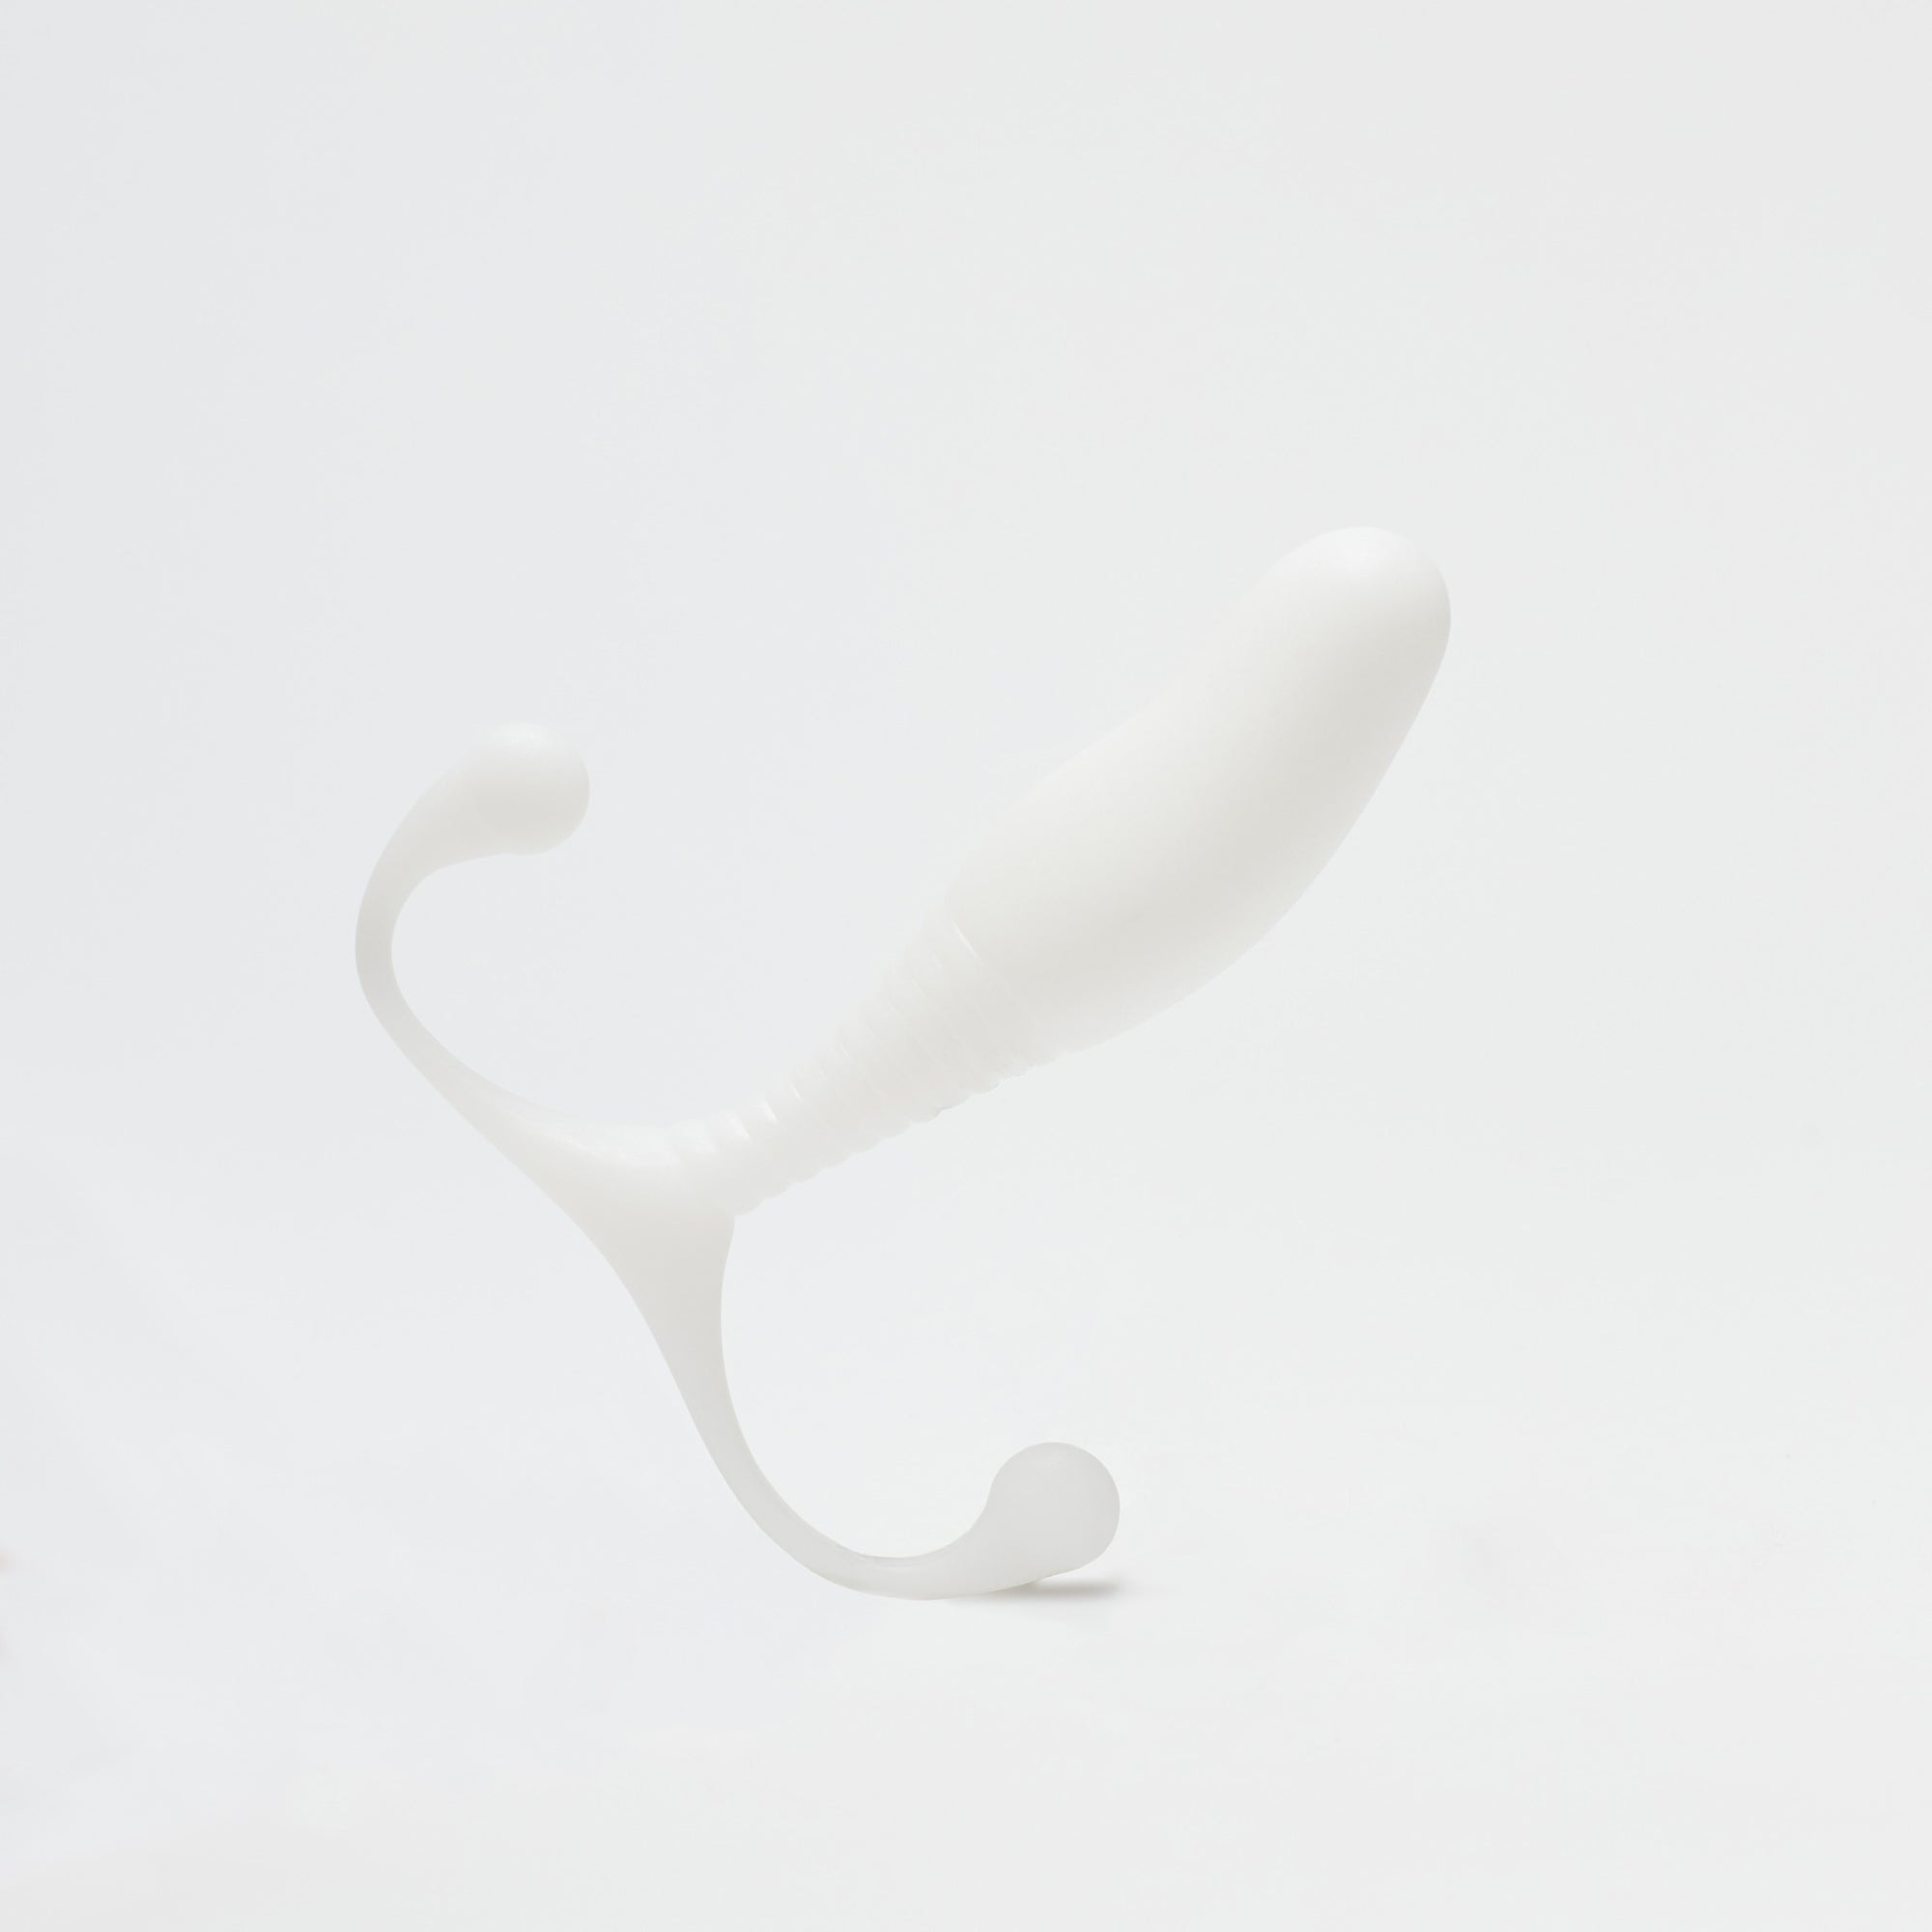 Aneros Mgx Syn Trident Prostate Massager